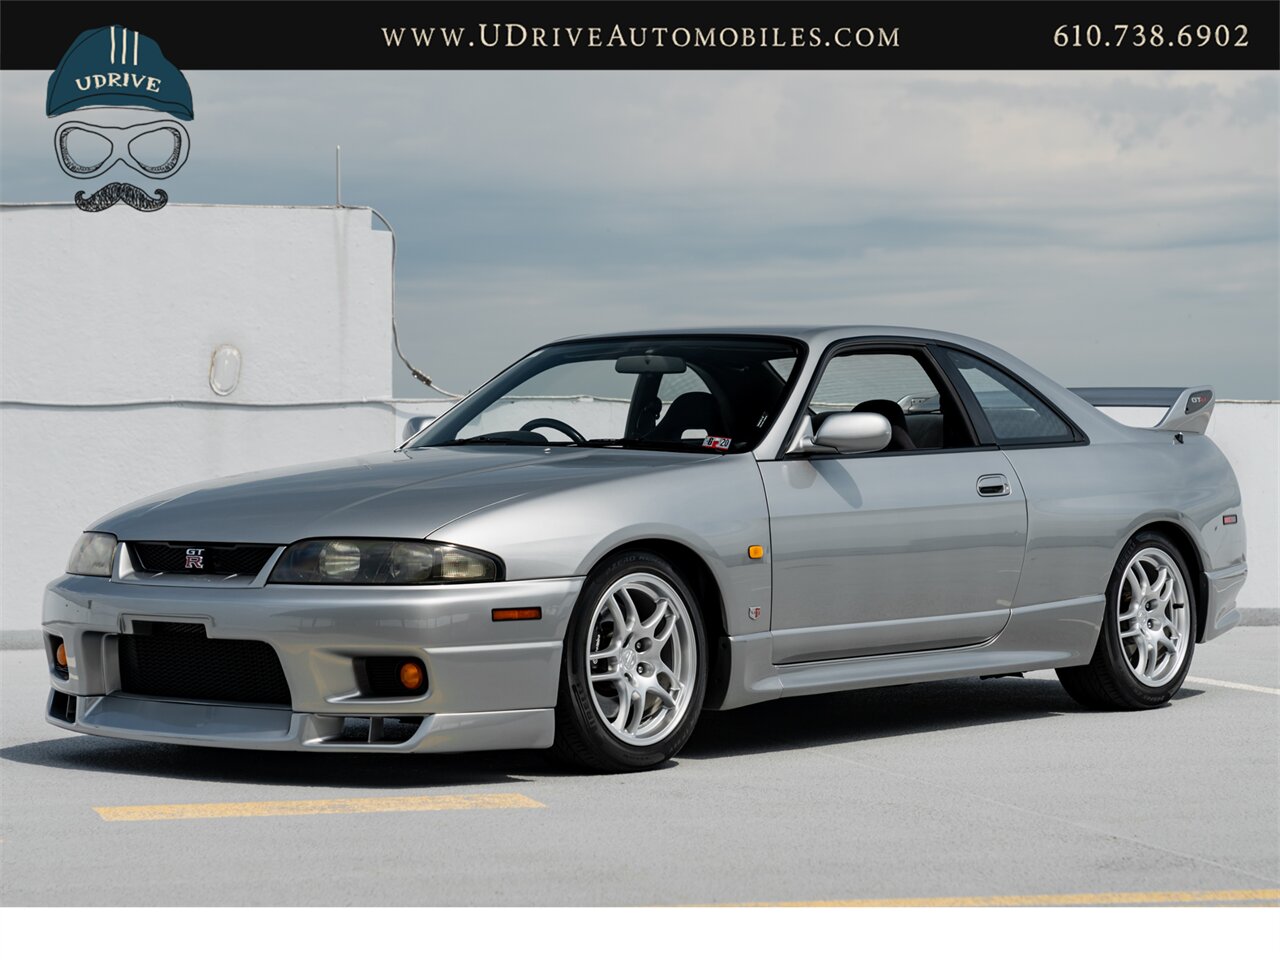 1997 Nissan Skyline GT-R R33 28k Miles Collector Grade  Motorex Legally Imported Titled Federalized Service History - Photo 11 - West Chester, PA 19382